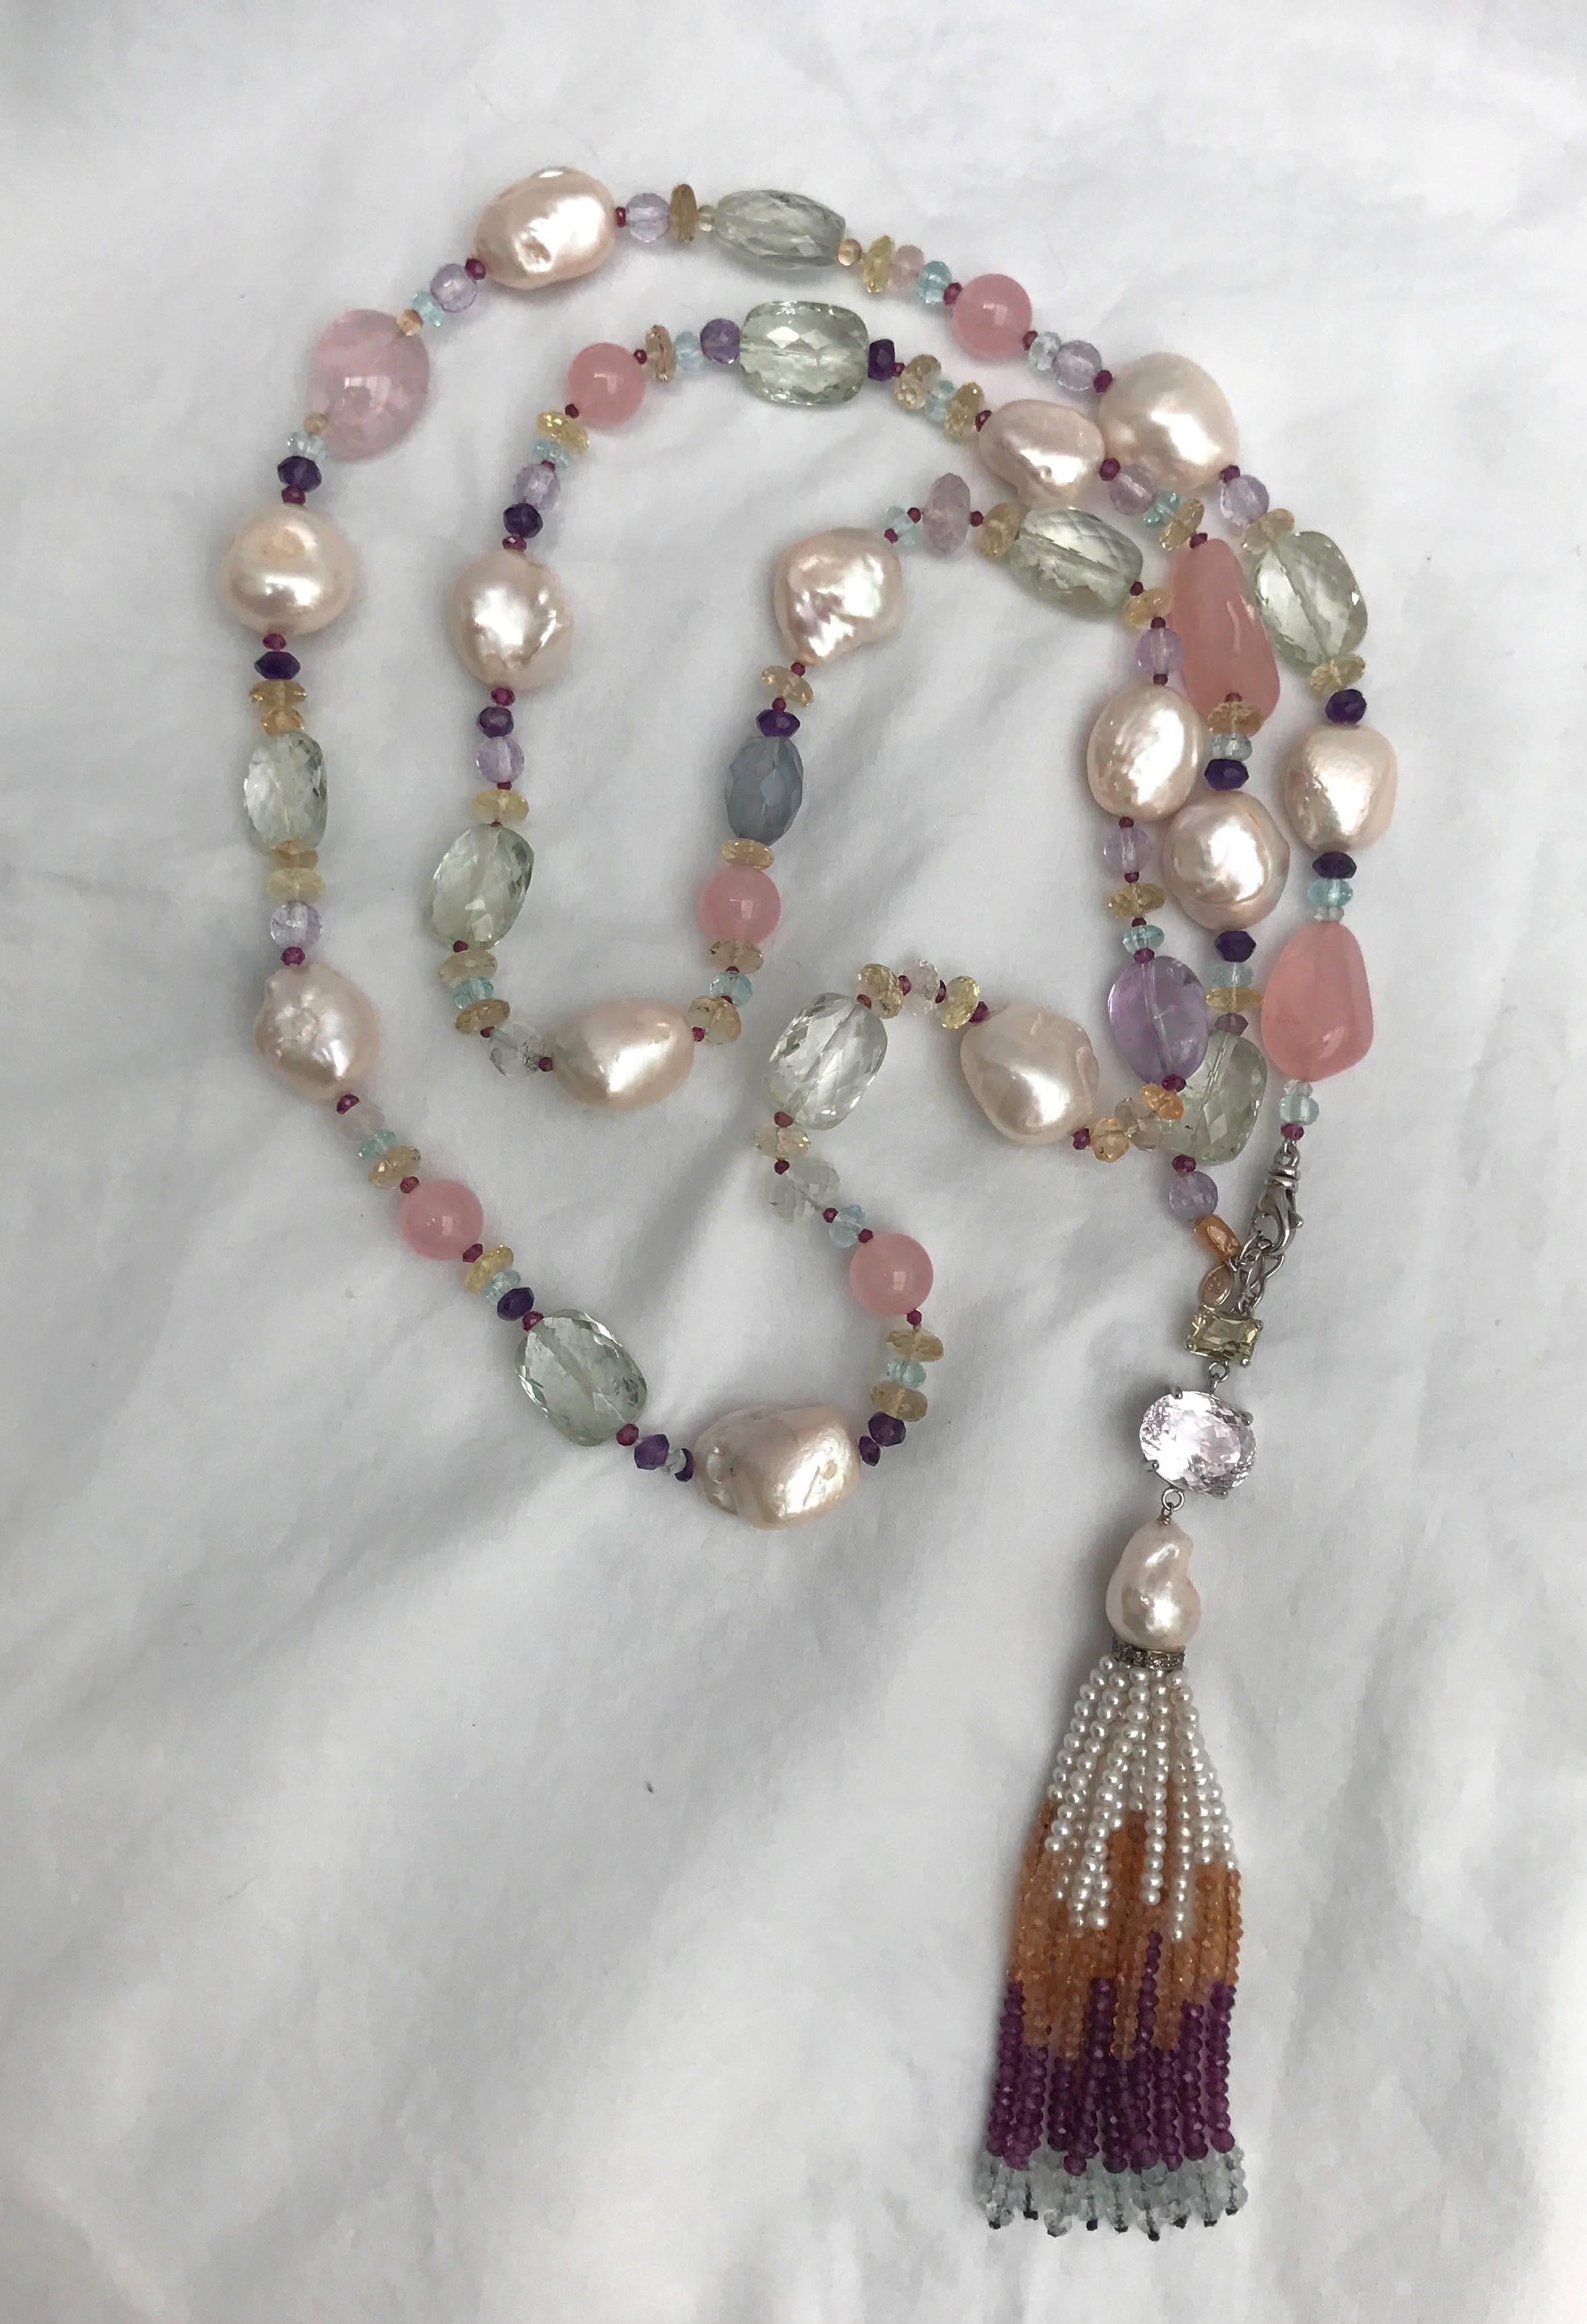 Long necklace with large Baroque Pearls, Amethyst, Citrine, Blue Topaz, Aquamarine, Pink Quartz and Fluorite beads create a gorgeous shimmering piece. The semiprecious stones highlight the luster and iridescence of the pearls, unifying the colored